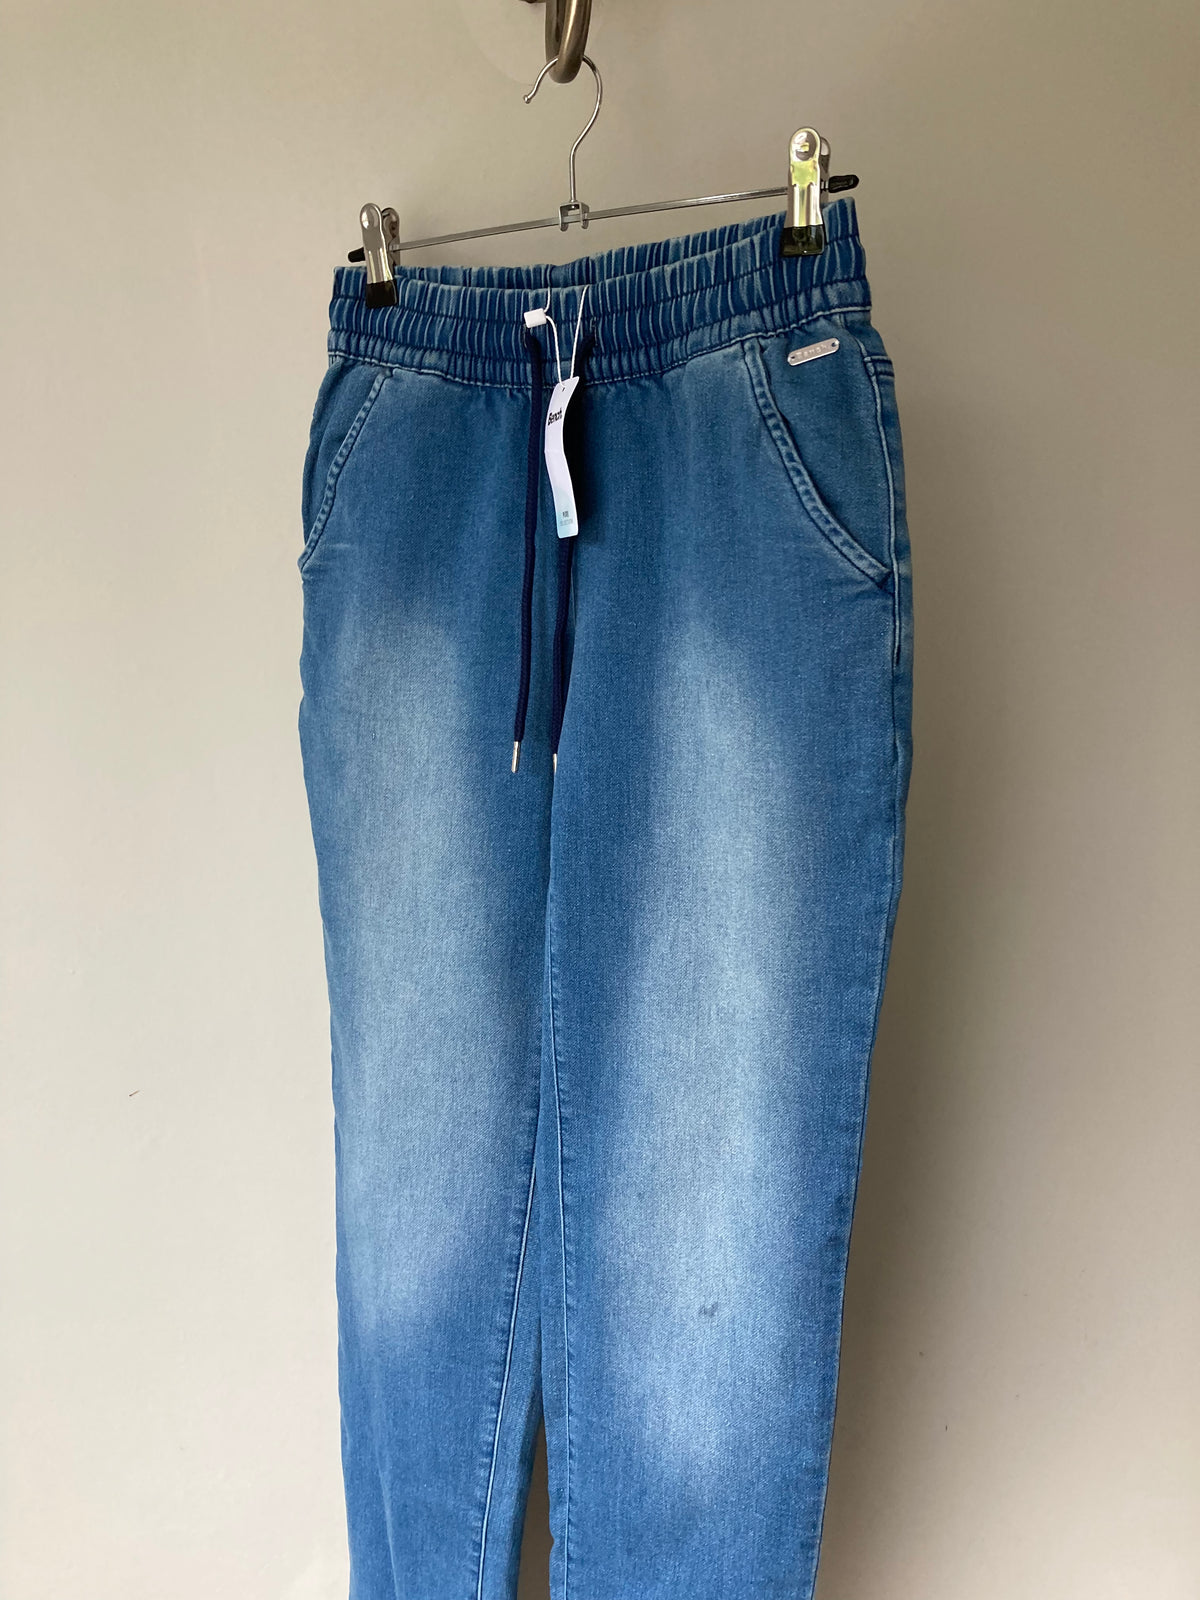 Slip on jeans by BENCH - Size 8/10